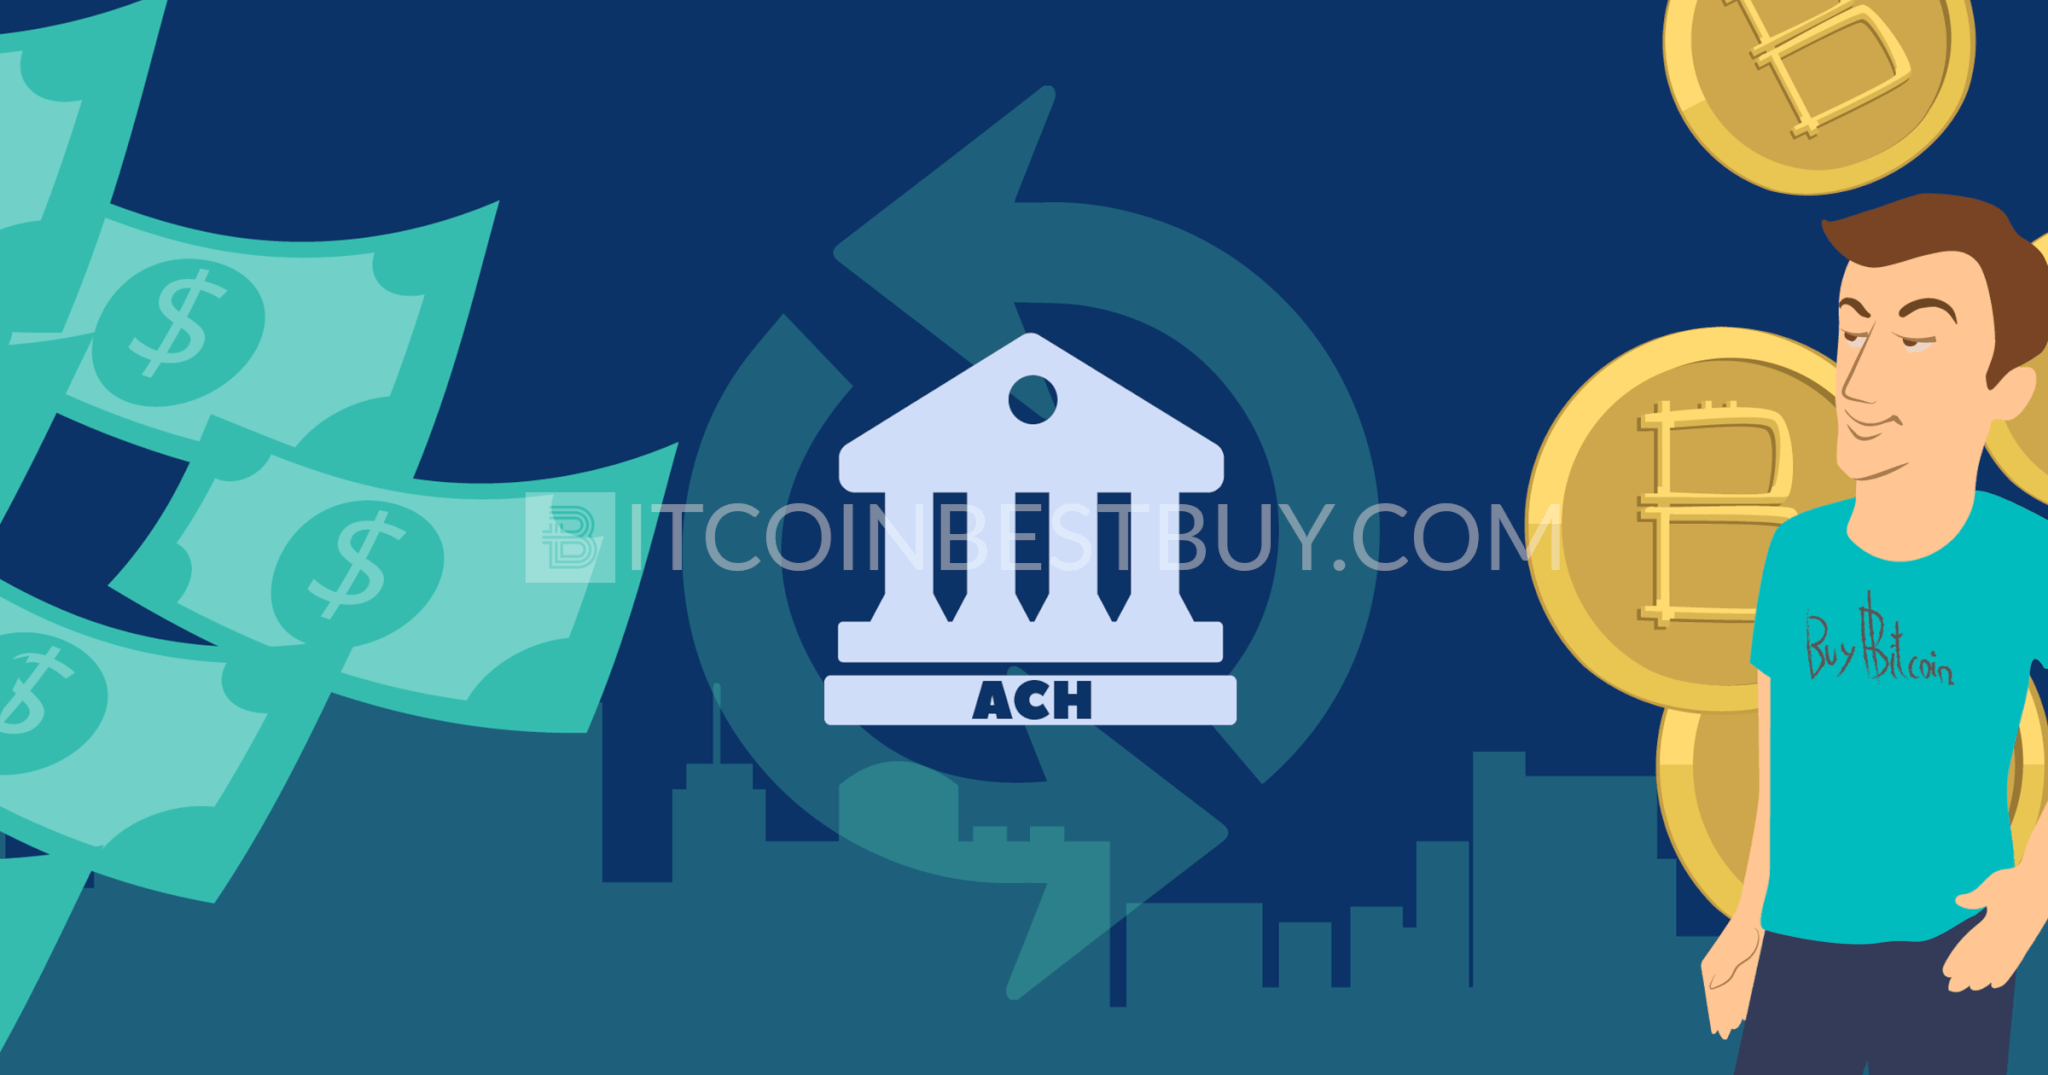 How to buy bitcoin with ach